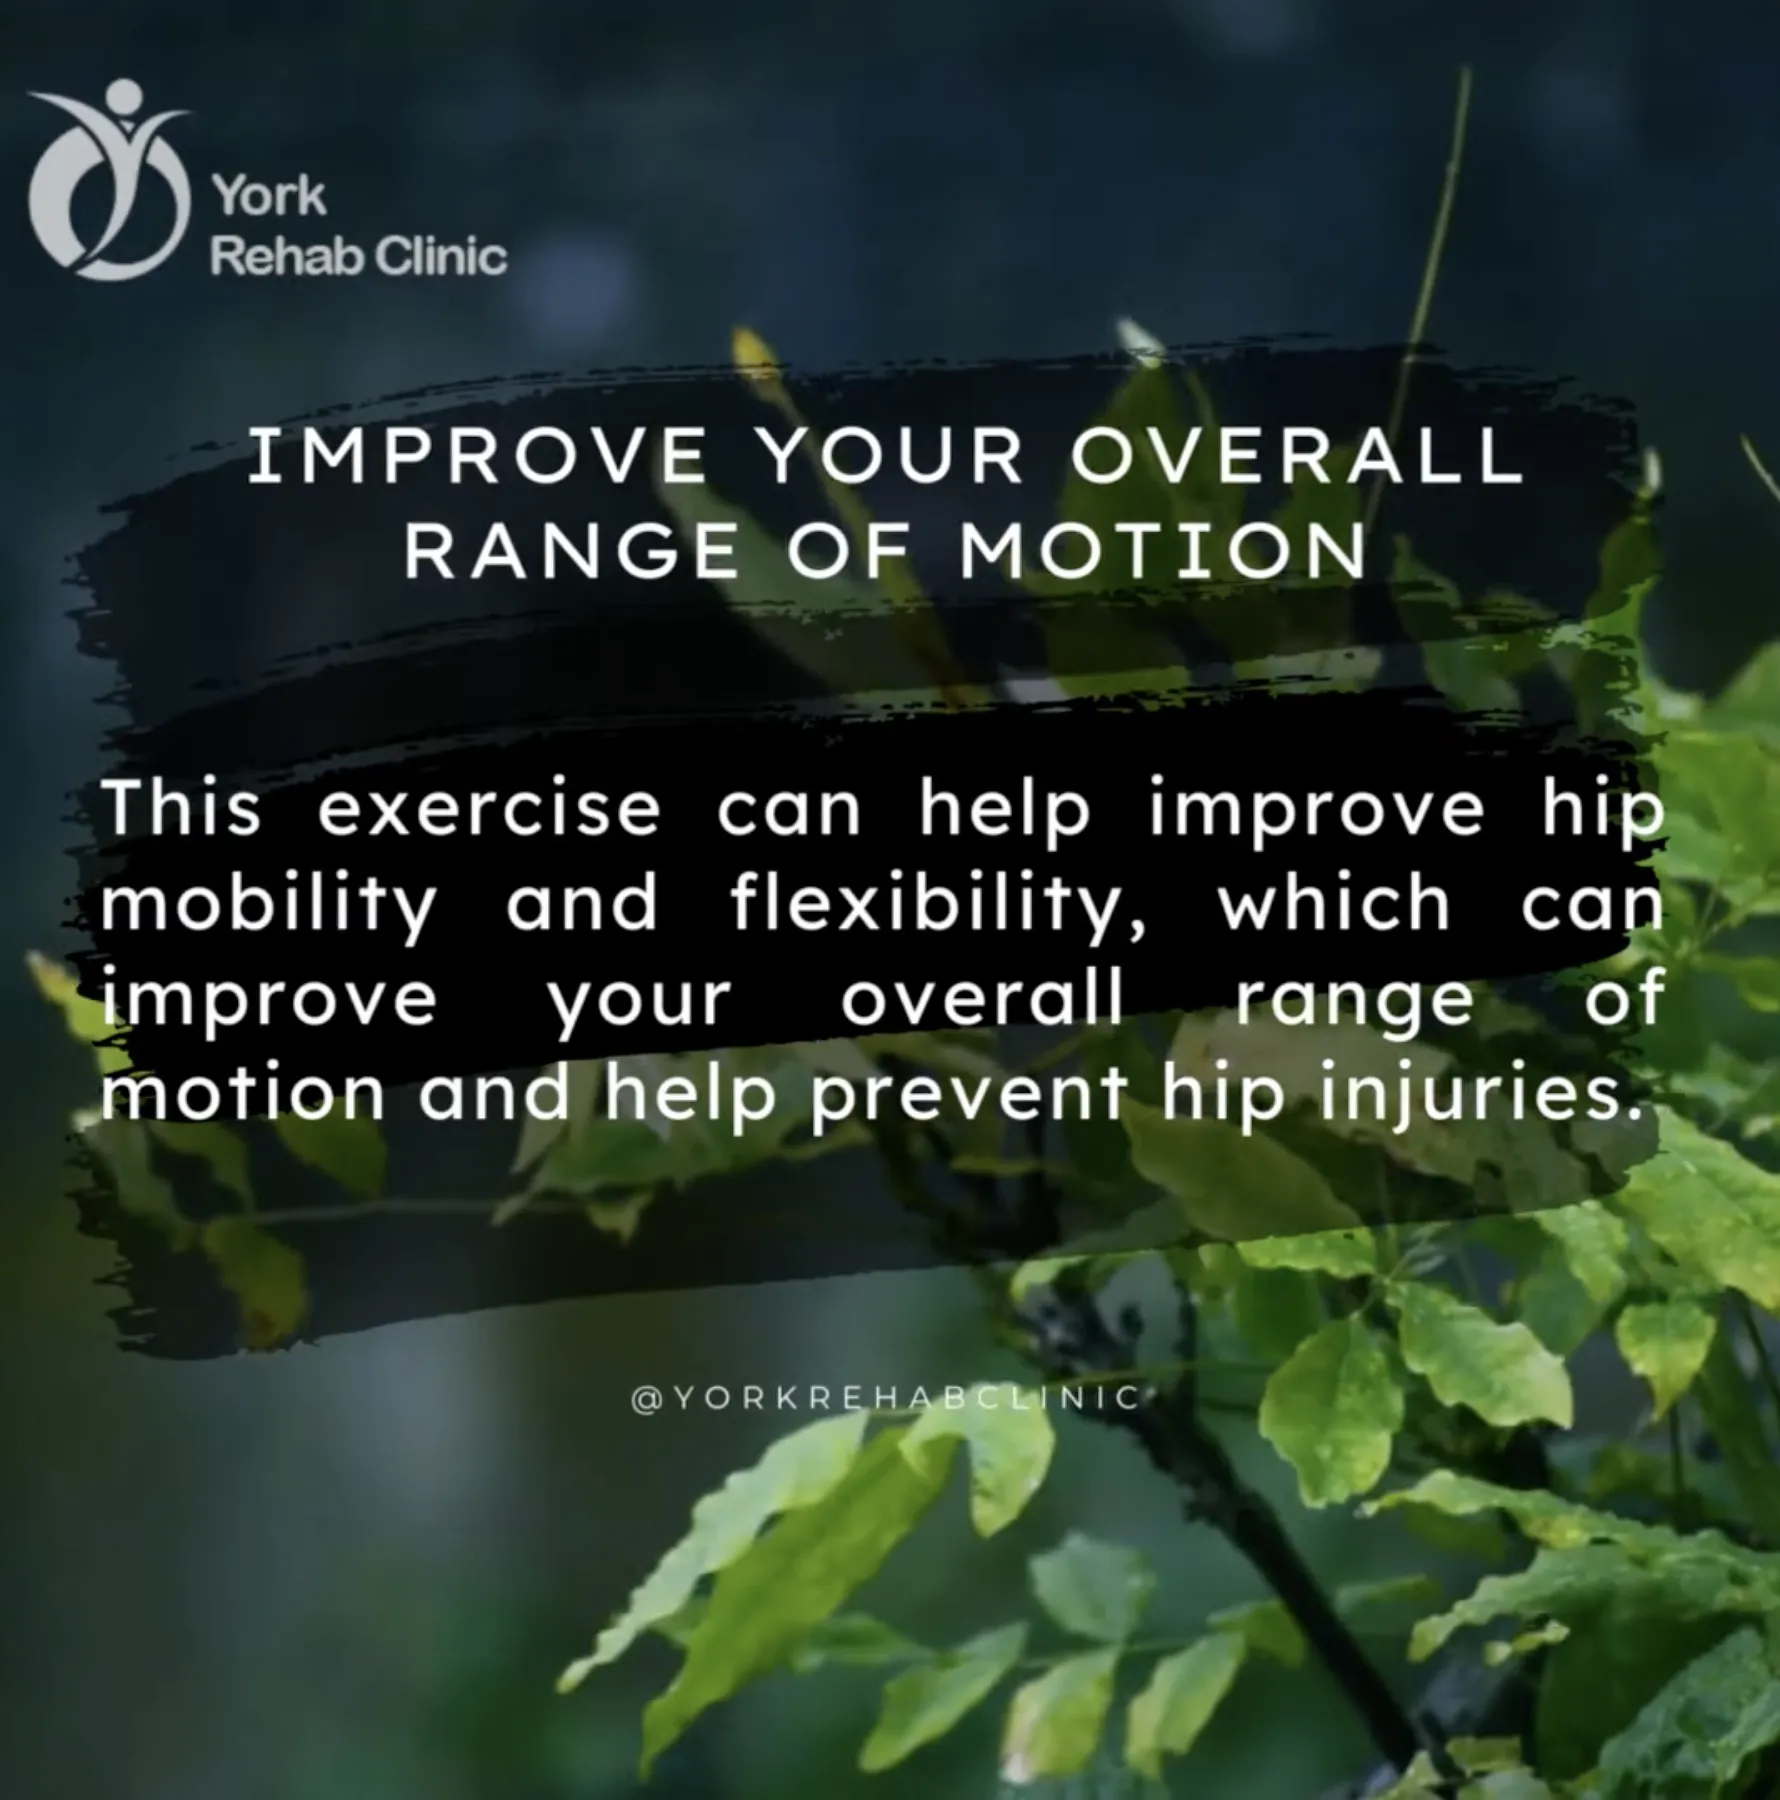 Improve your overall range of motion